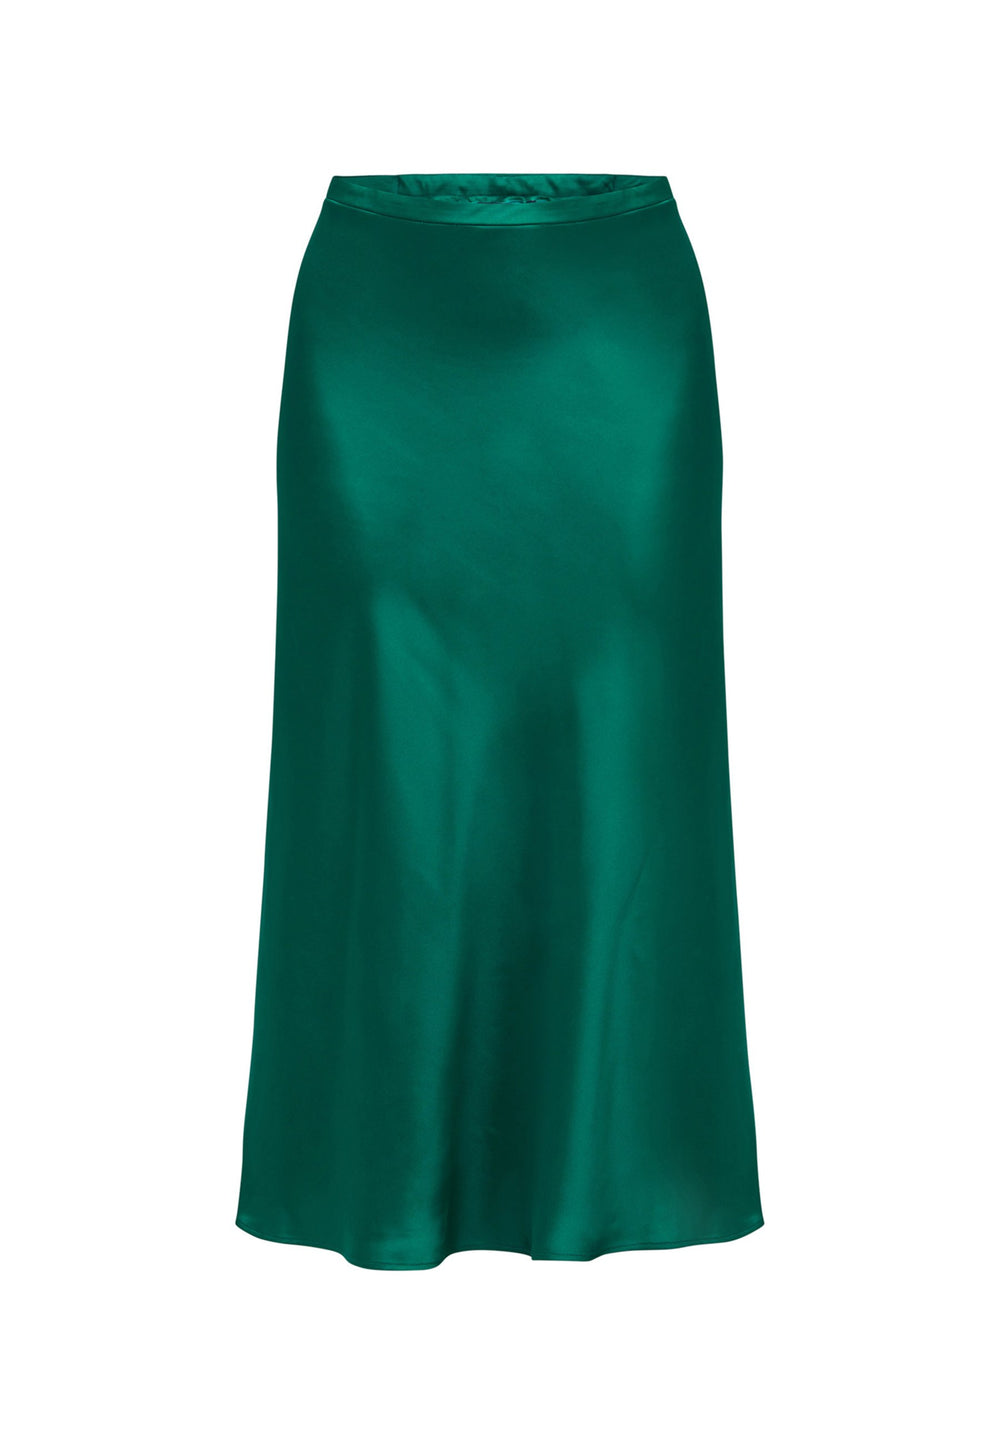 Indulge in the Peyton Dark Emerald Green Satin Skirt, a stunning mid-calf length piece. With its form-flattering high-waisted silhouette and luxurious dark emerald green satin fabric, this skirt exudes elegance. The side seam zip ensures a seamless fit. Perfect for special occasions or elevated everyday wear, it captivates with its timeless appeal, leaving a lasting impression wherever you go.